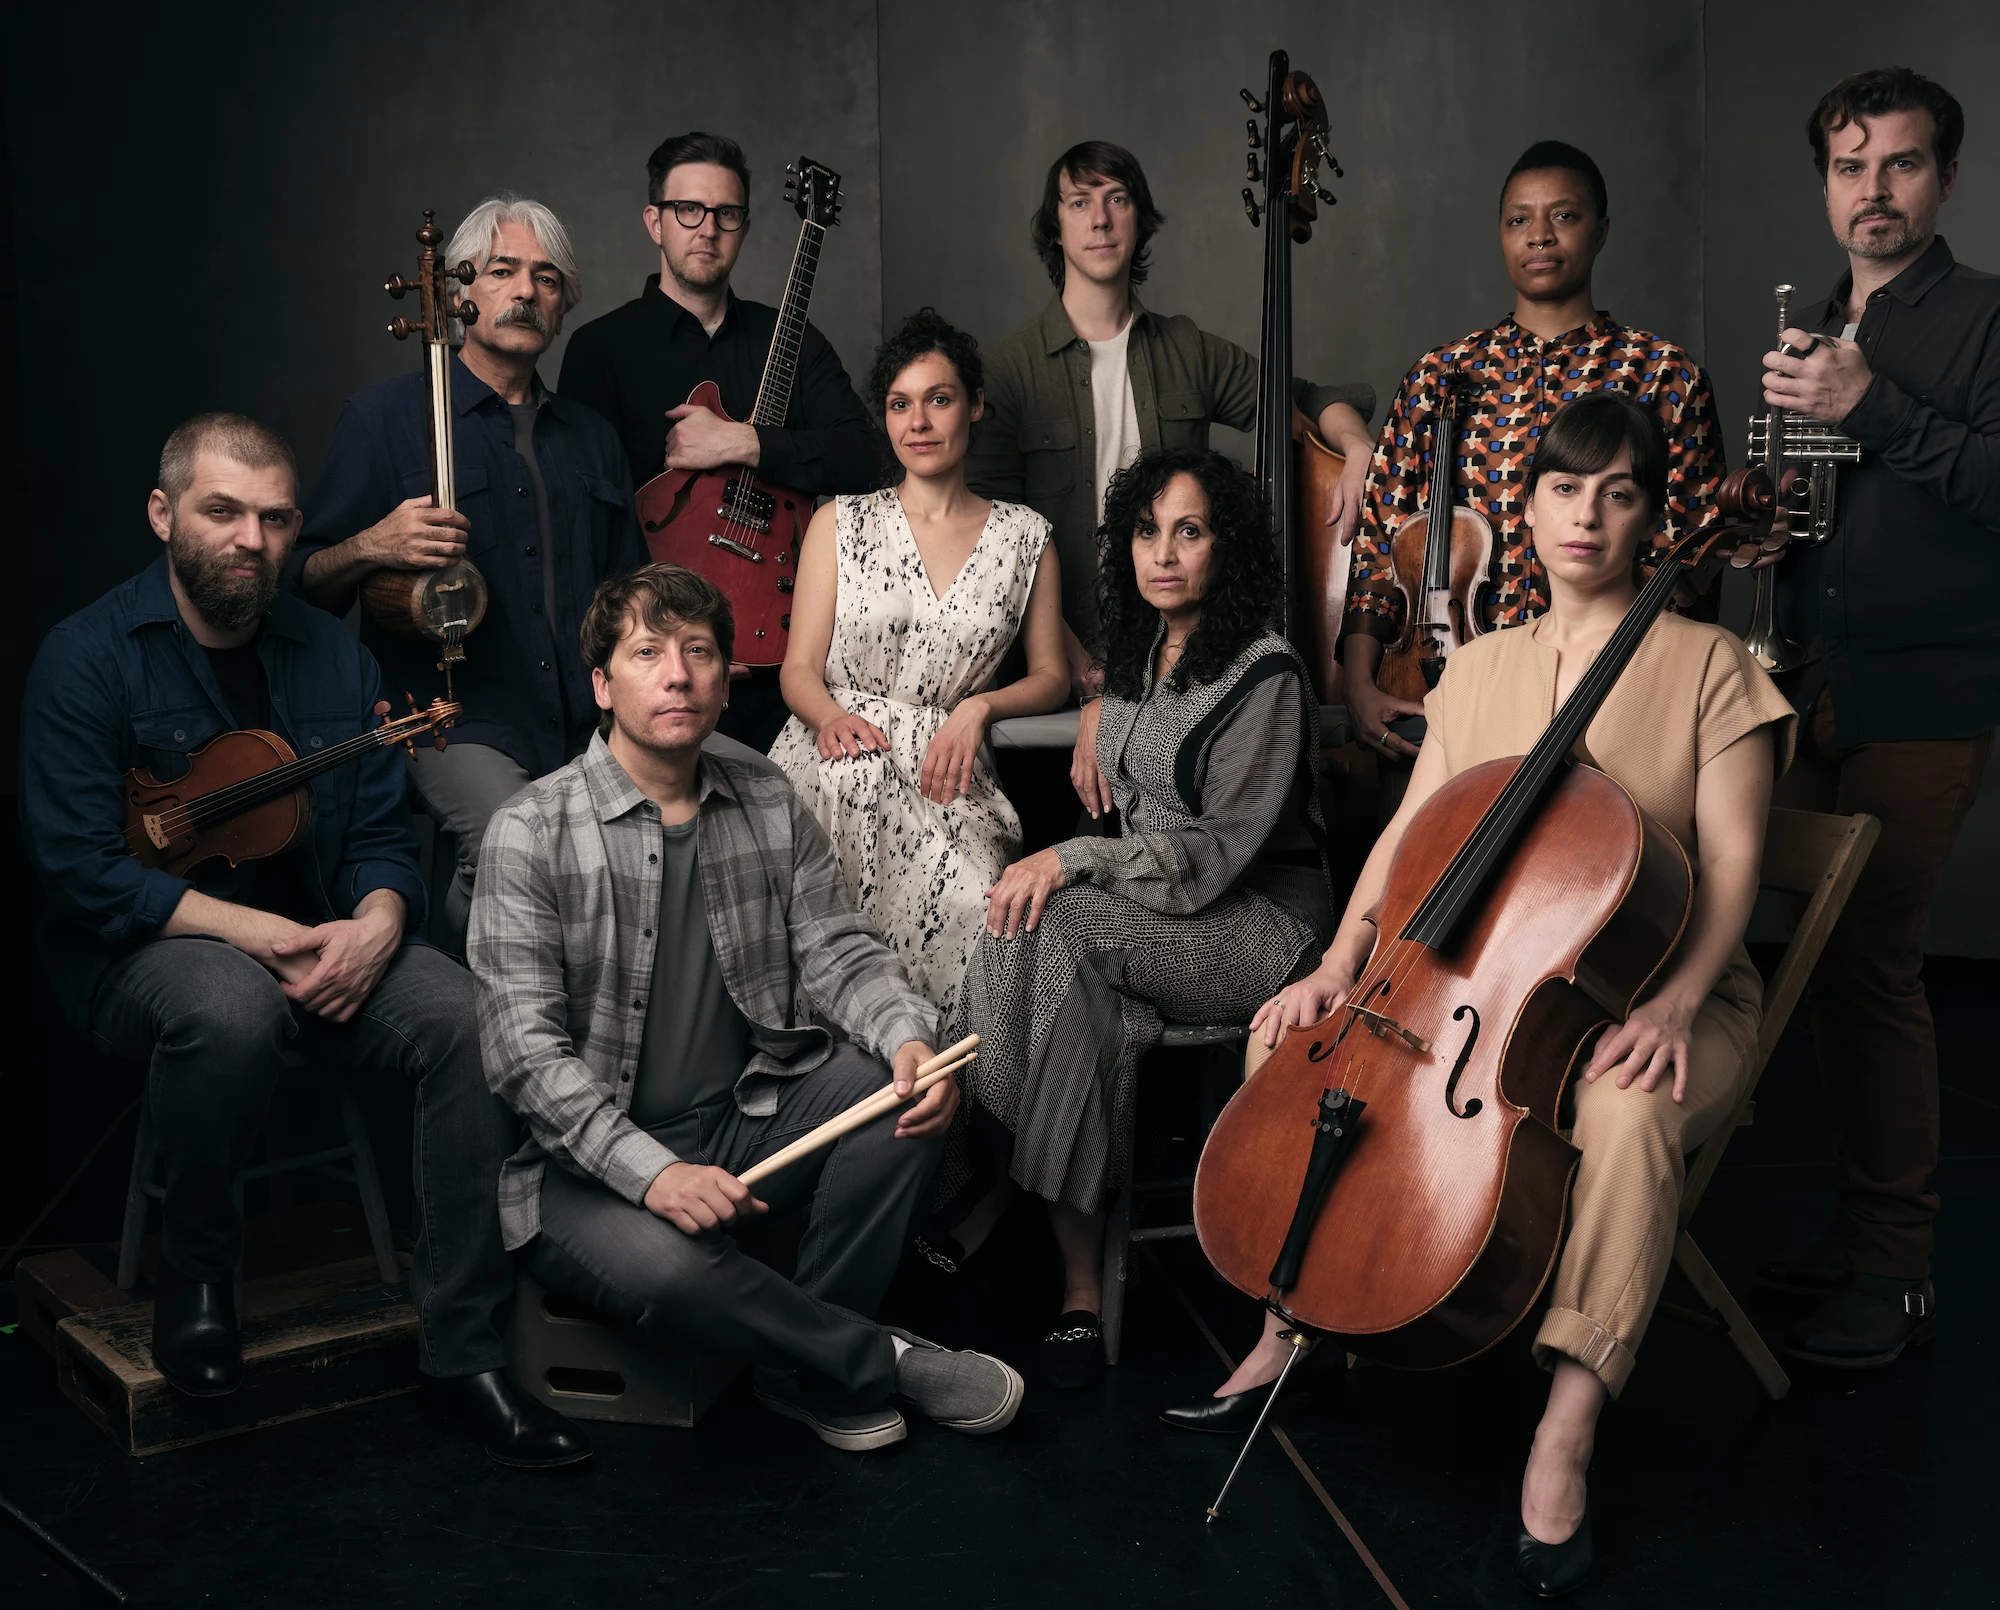 The musical cast of Osvaldo Golijov’s Falling Out of Time; PHOTO CREDIT: Marco Giannavola